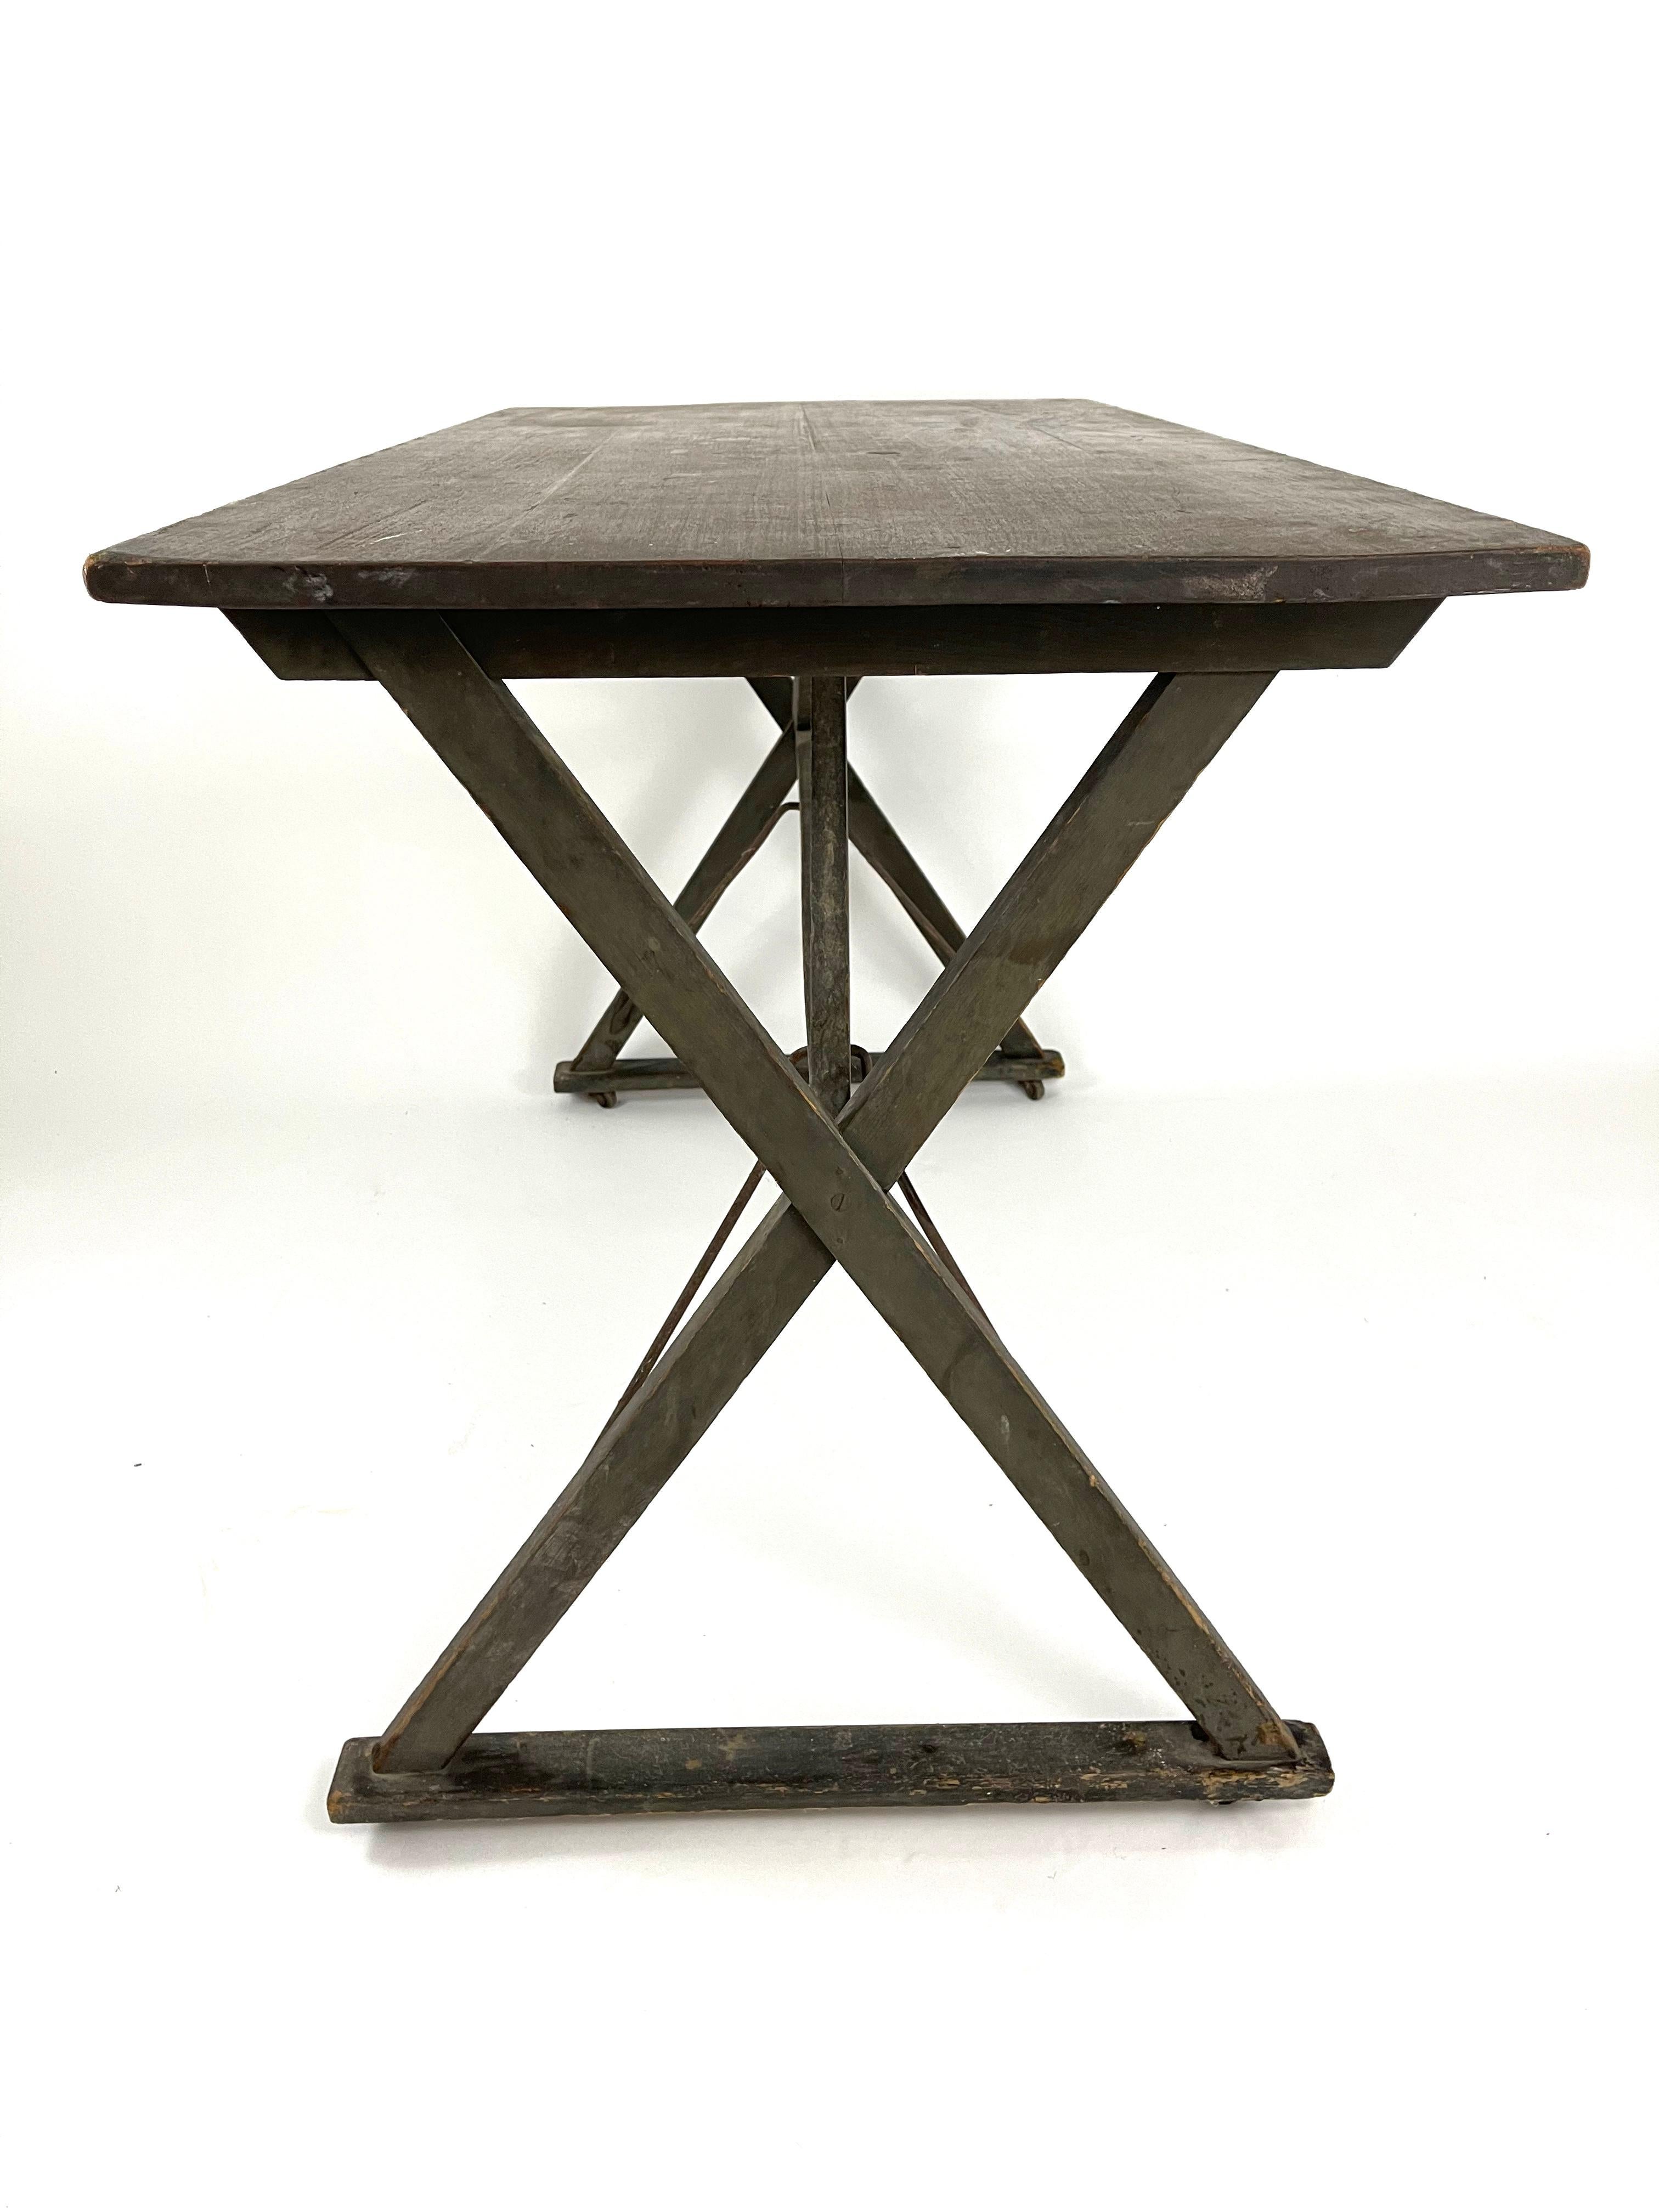 A 19th century American gray green panted poplar side table with a rectangular top supported by a sawbuck X-form base with iron brackets, joined by cross stretchers, retaining its original surface.

 

 